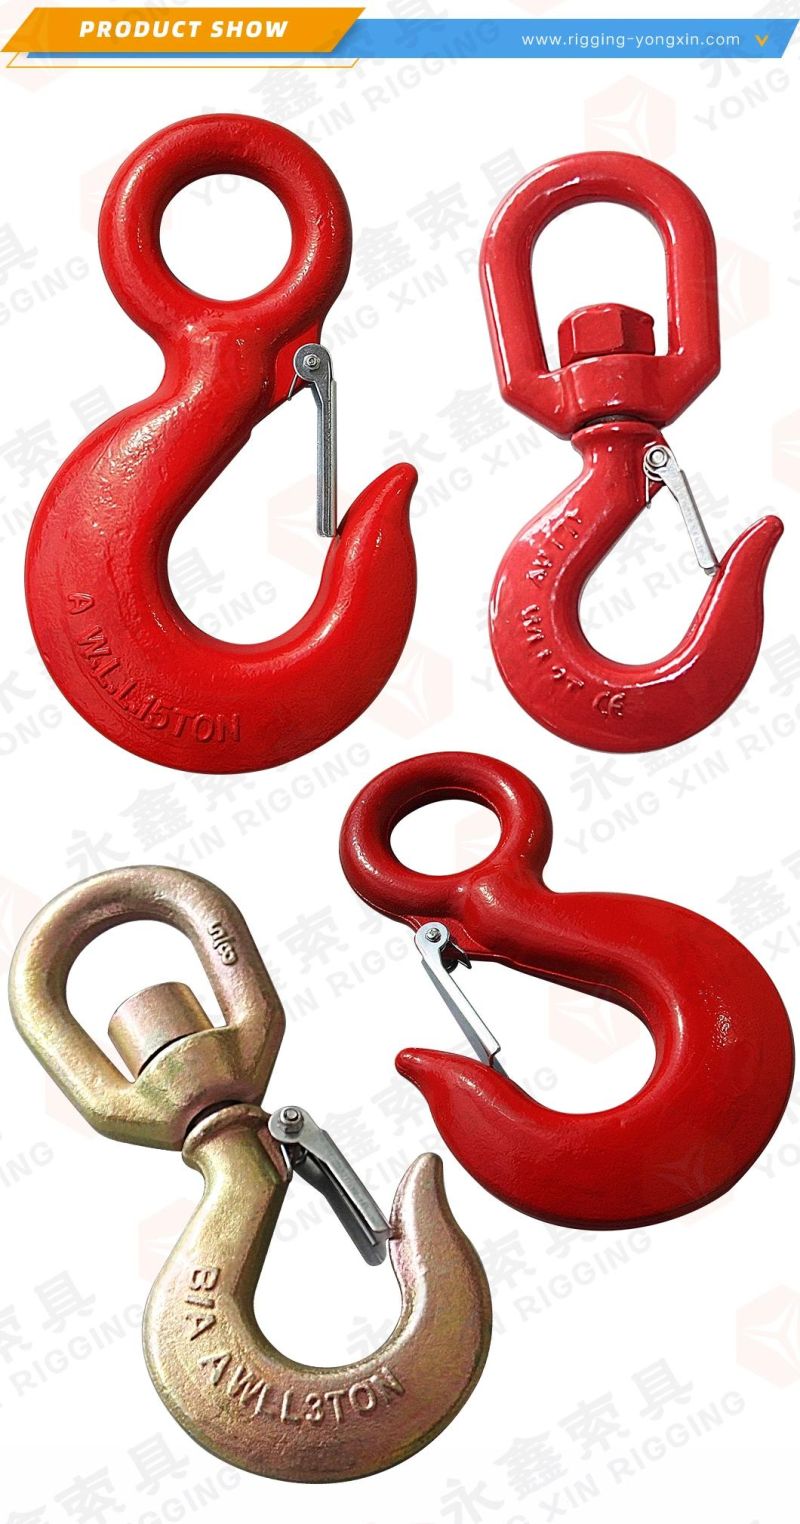 Qingdao Hardware Drop Forged Painted Eye Hook U. S. Typewith Safety Latch 320c 320A Lifting Eye Hoist Hook